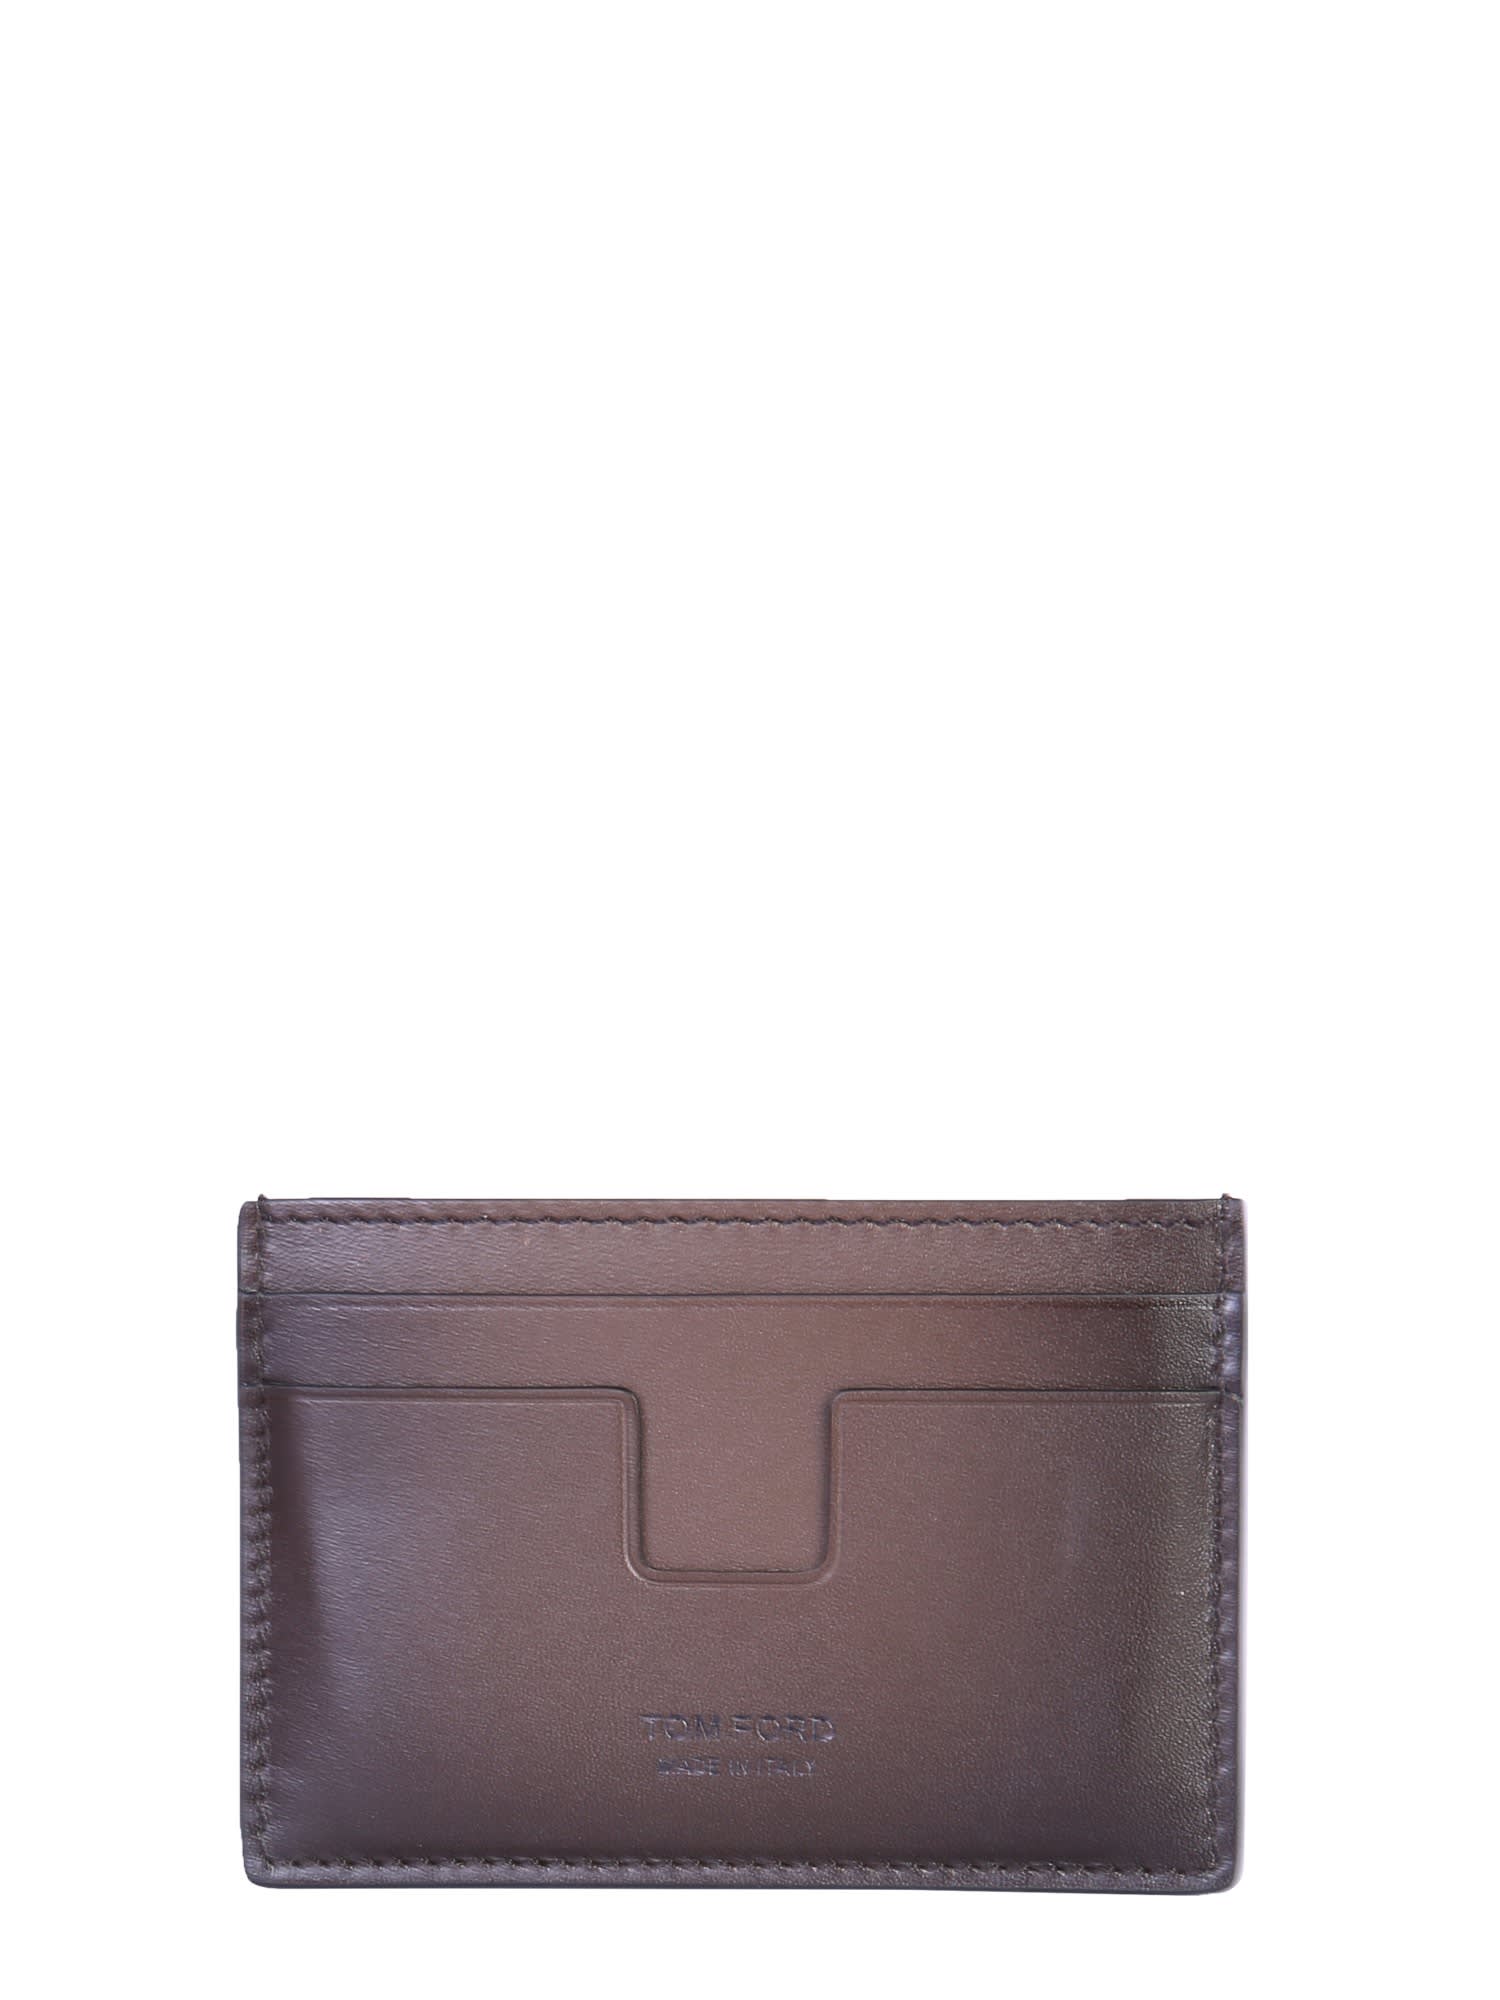 TOM FORD CARD HOLDER WITH LOGO,11296742